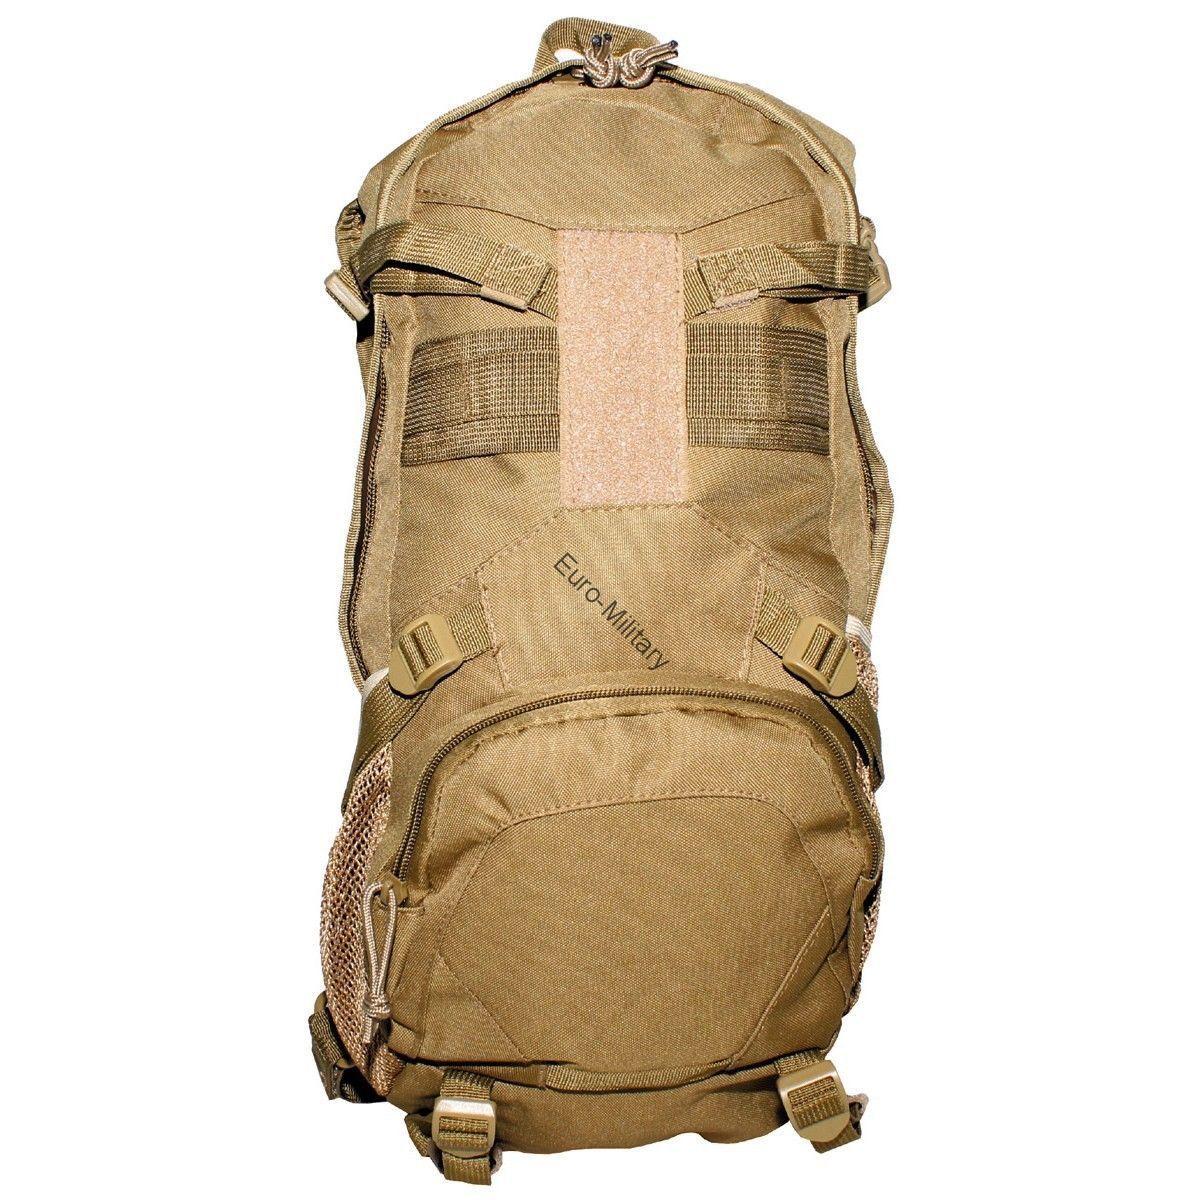 Professional Combat Scout Backpack 25L - Coyote